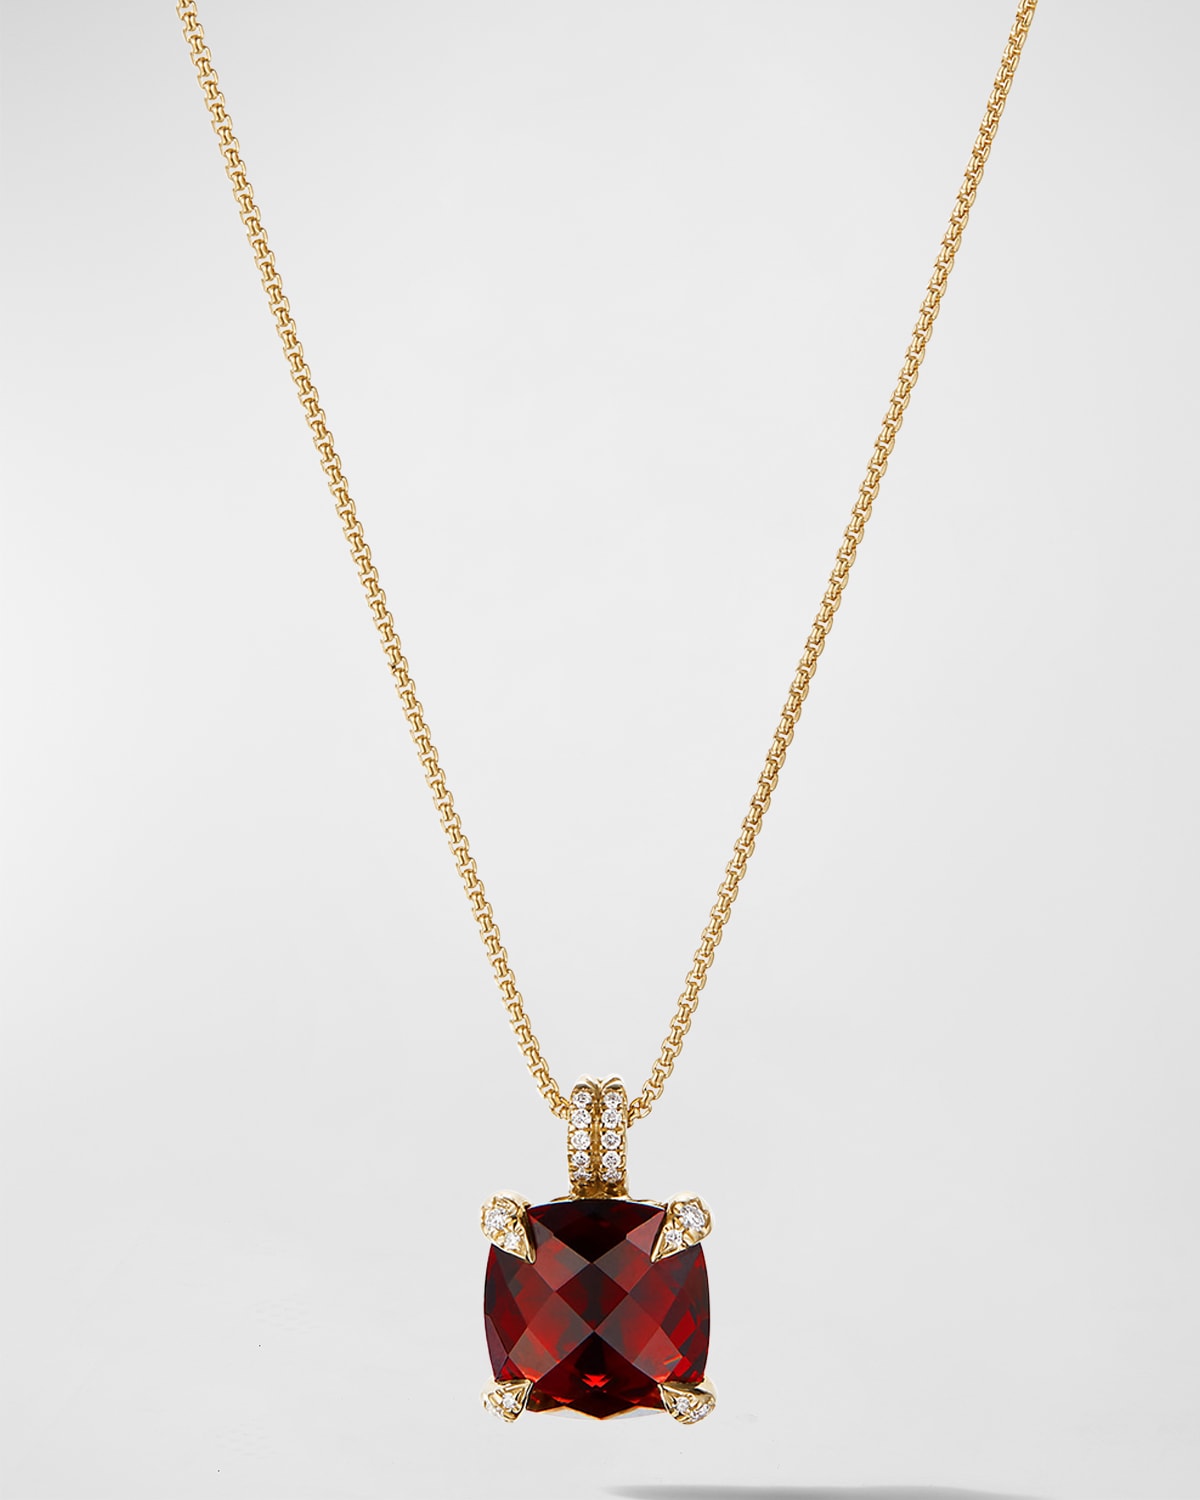 David Yurman Chatelaine Pendant Necklace With Gemstone And Diamonds In 18k Gold, 11mm, 18"l In Garnet